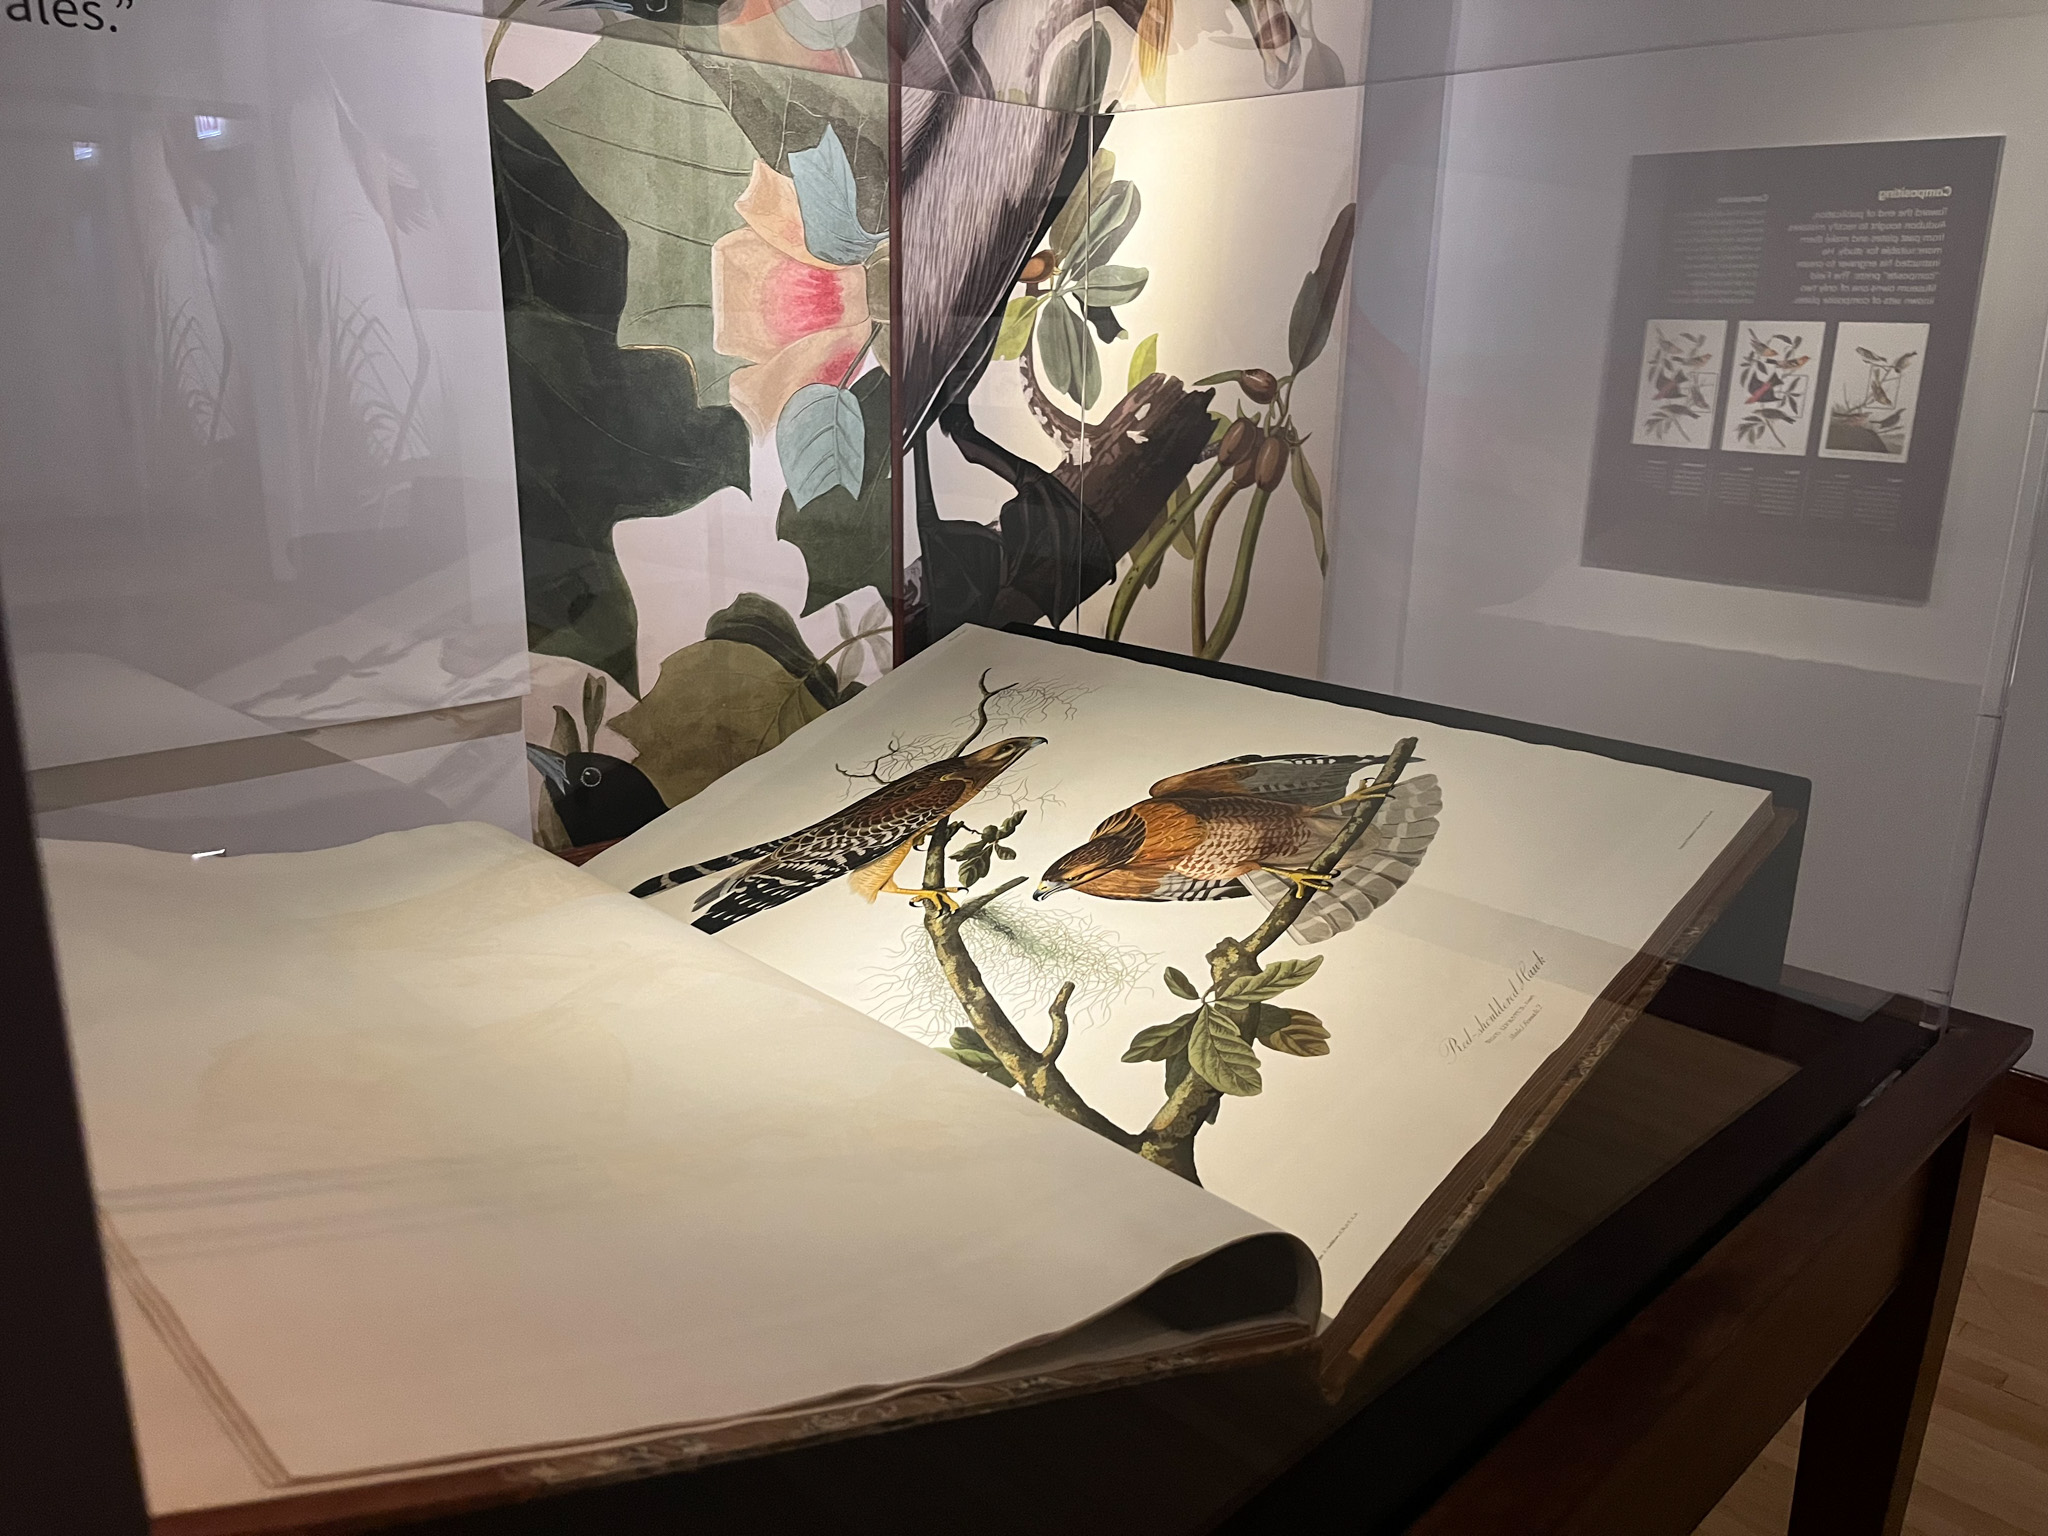 A very large book with artistic renderings of birds is seen in a glass display case.